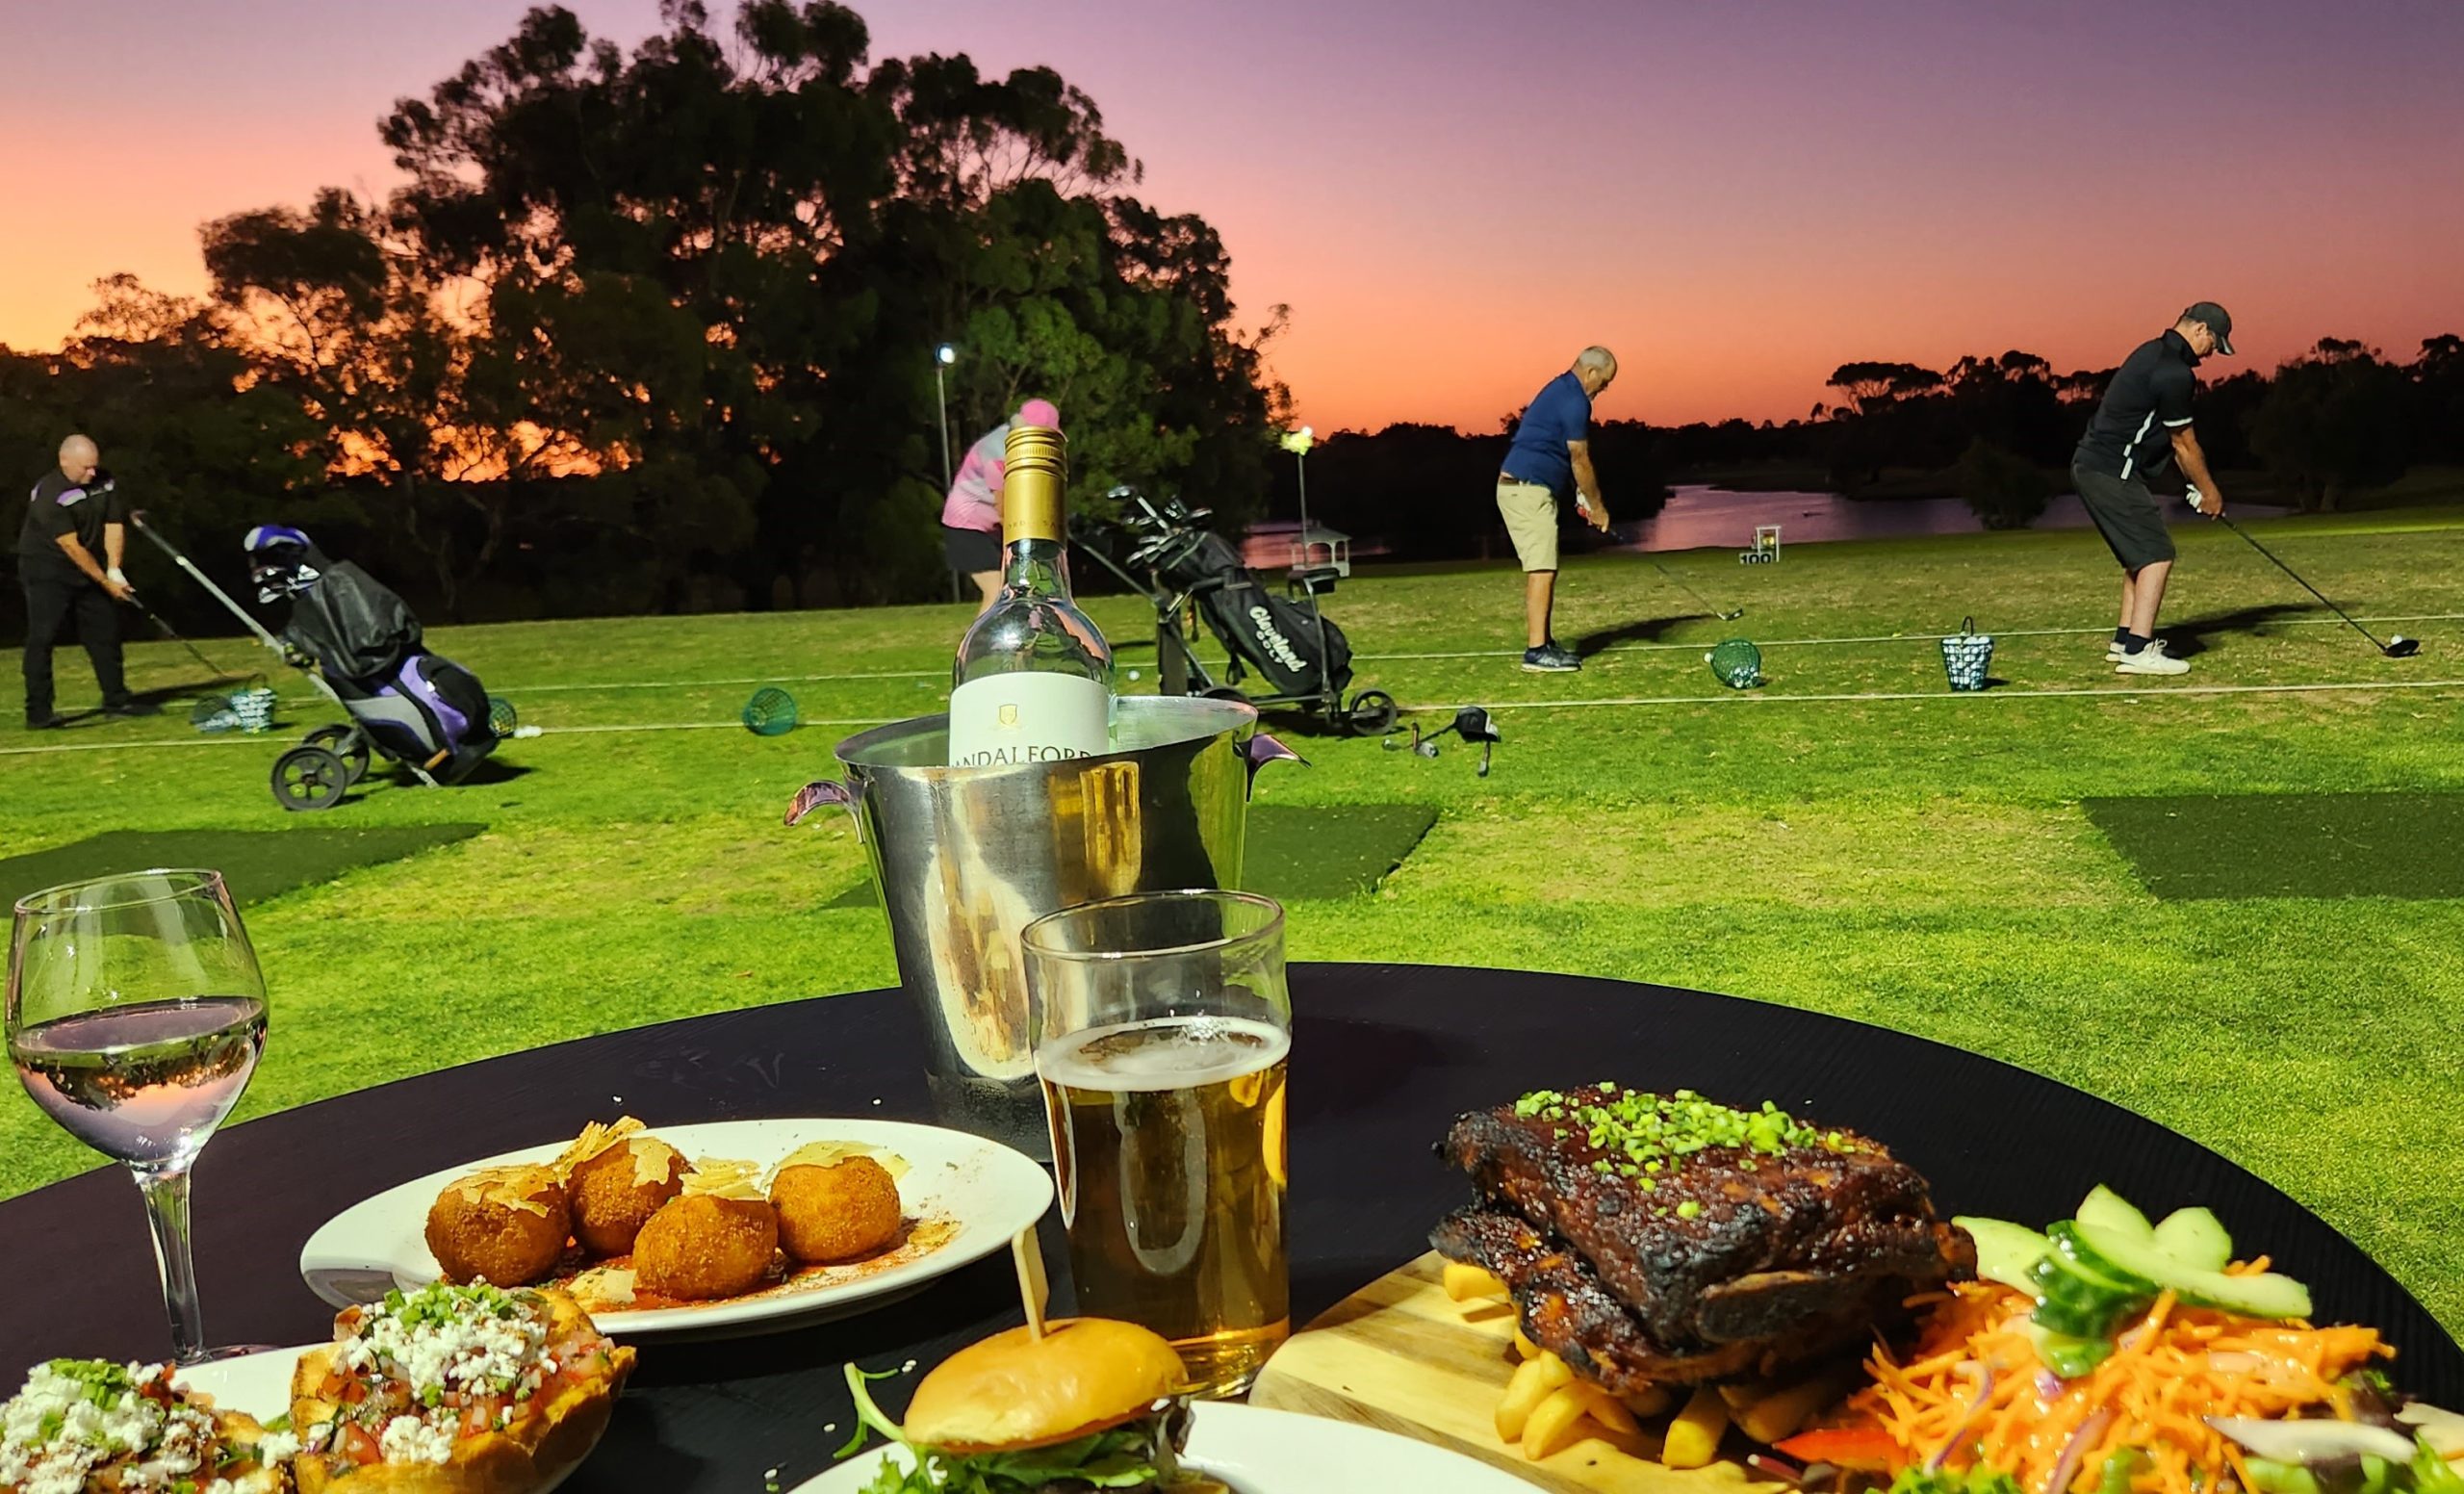 Vibrant-food-with-a-wine-bucket-beer-and-wine-and-4-golfers-in-the-background-with-a-purple-and-orange-sunset-above-the-lake